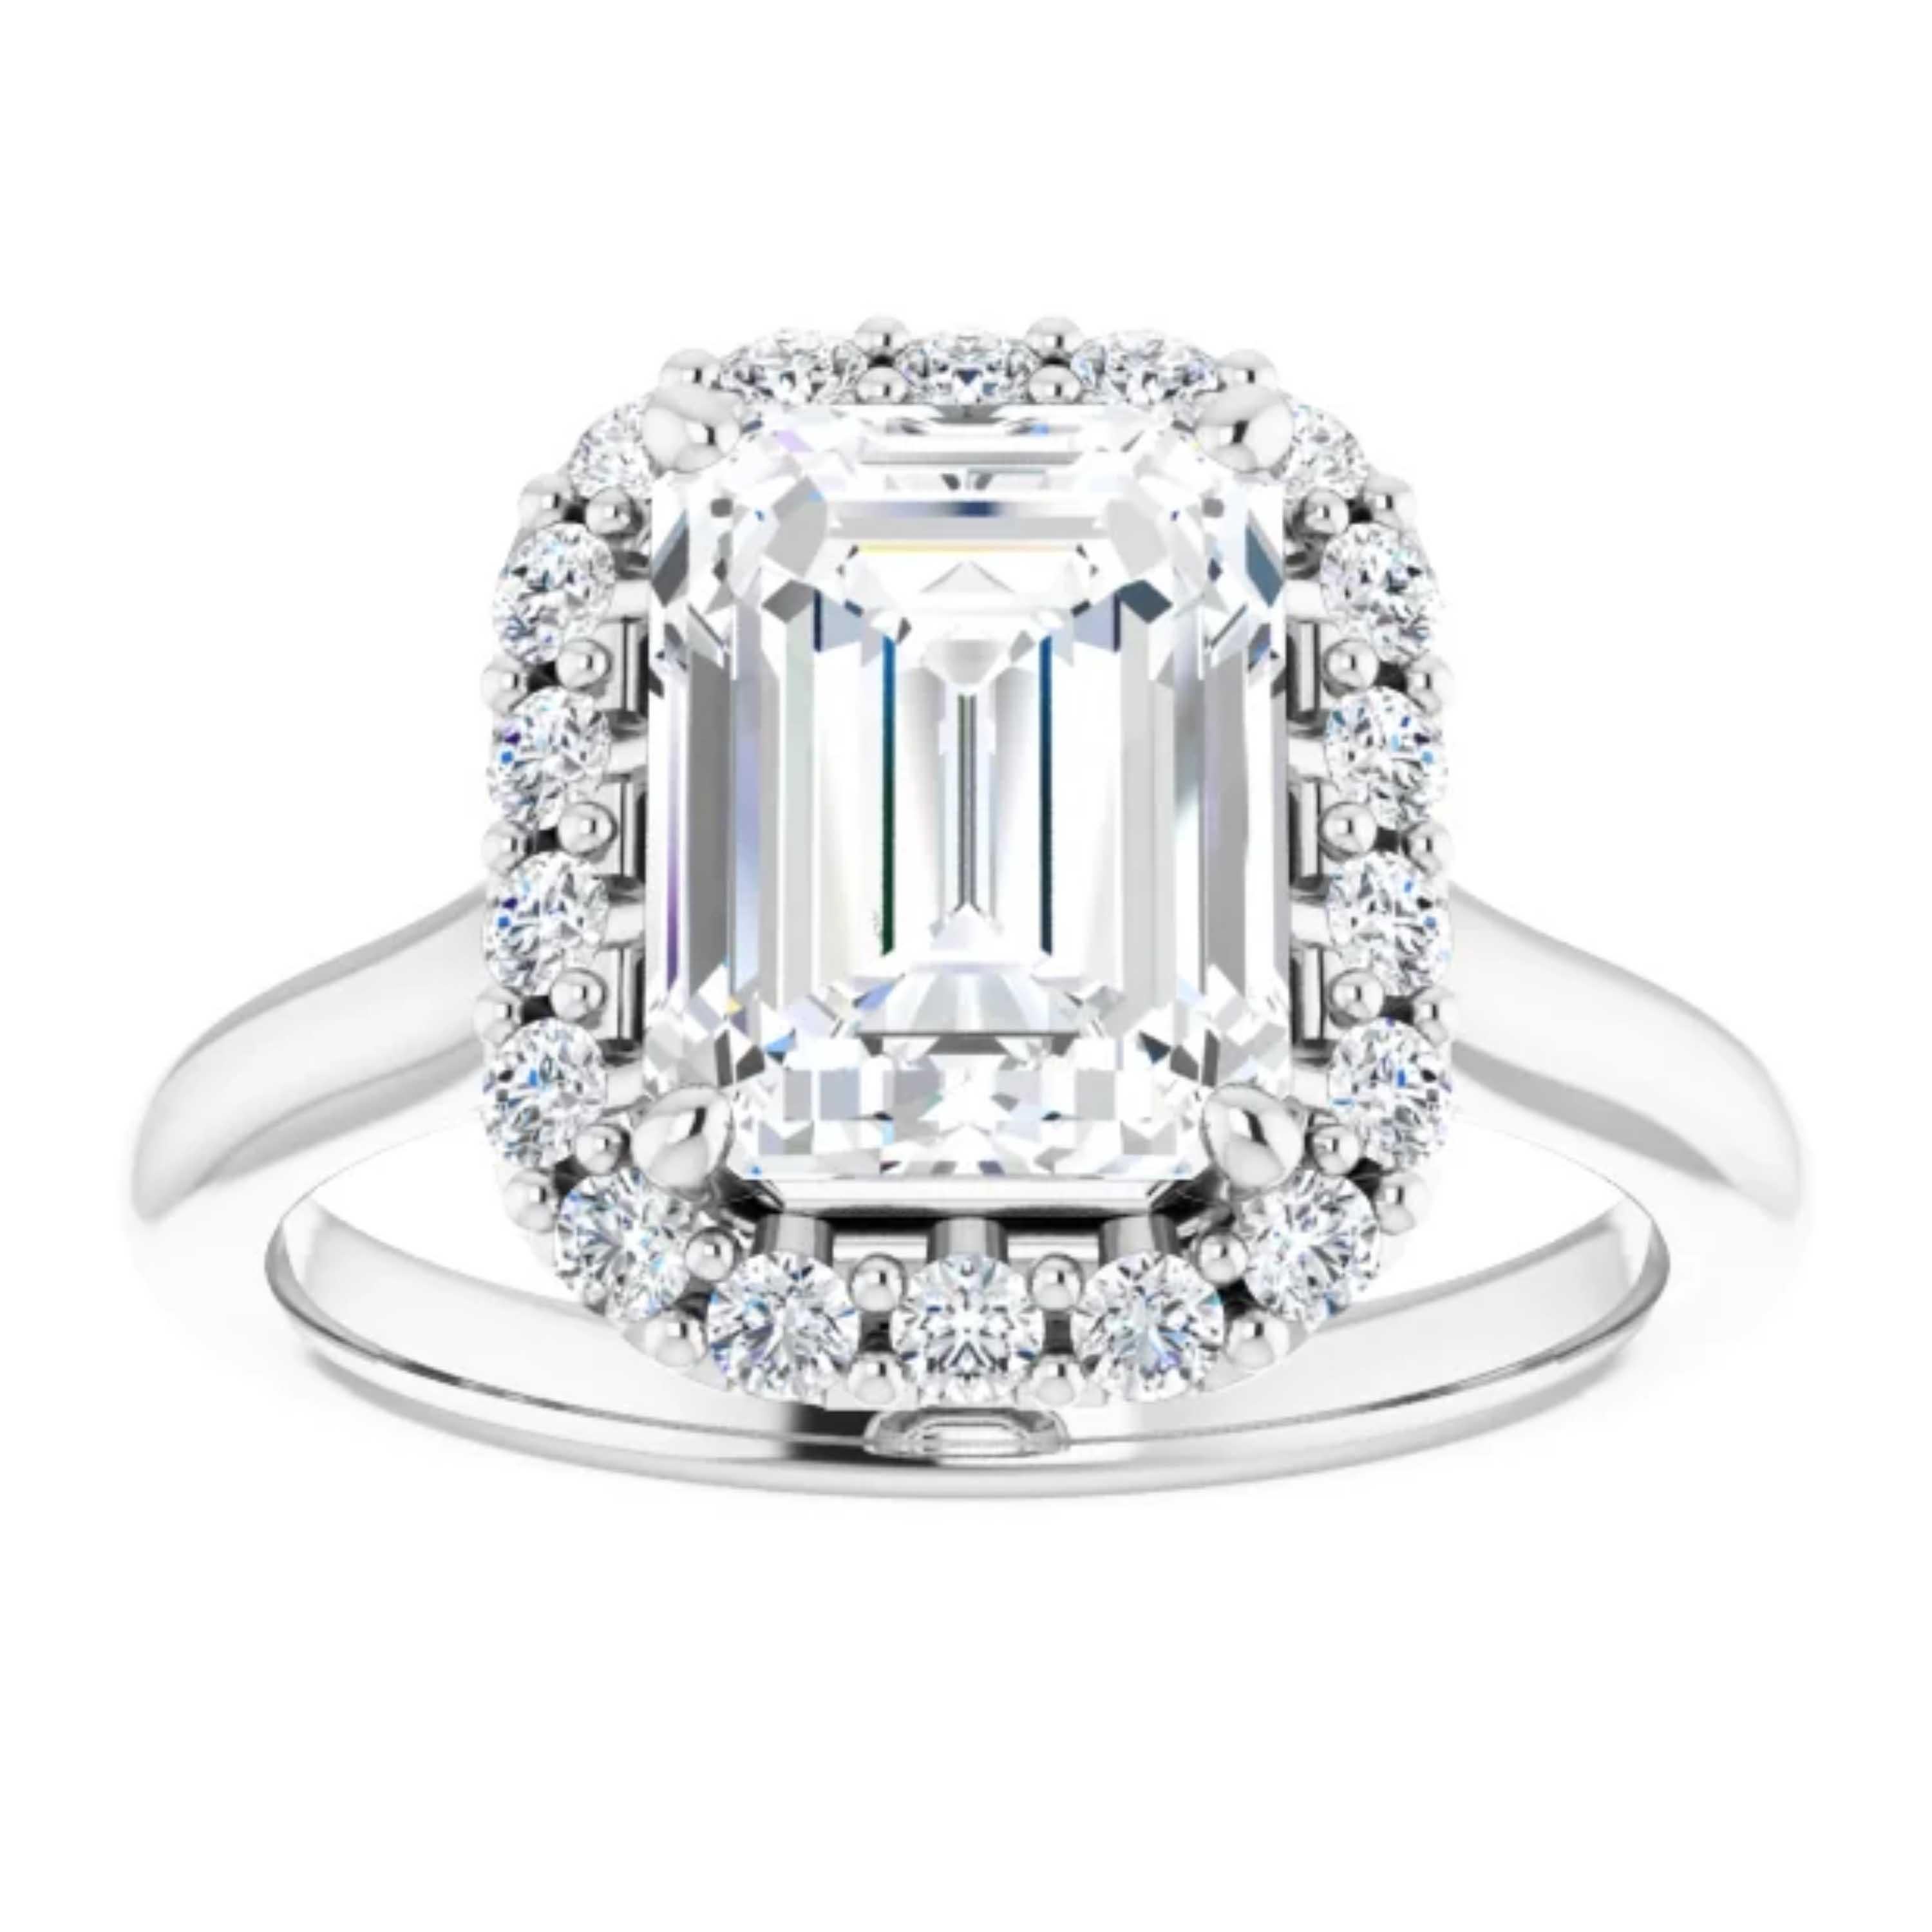 An emerald cut GIA certified diamond is amplified by a halo of fiery white diamonds on this simple yet unique engagement ring. Showcasing a plain 14k white gold shank, this beautiful wedding ring is a transcendent reminder of your everlasting love,